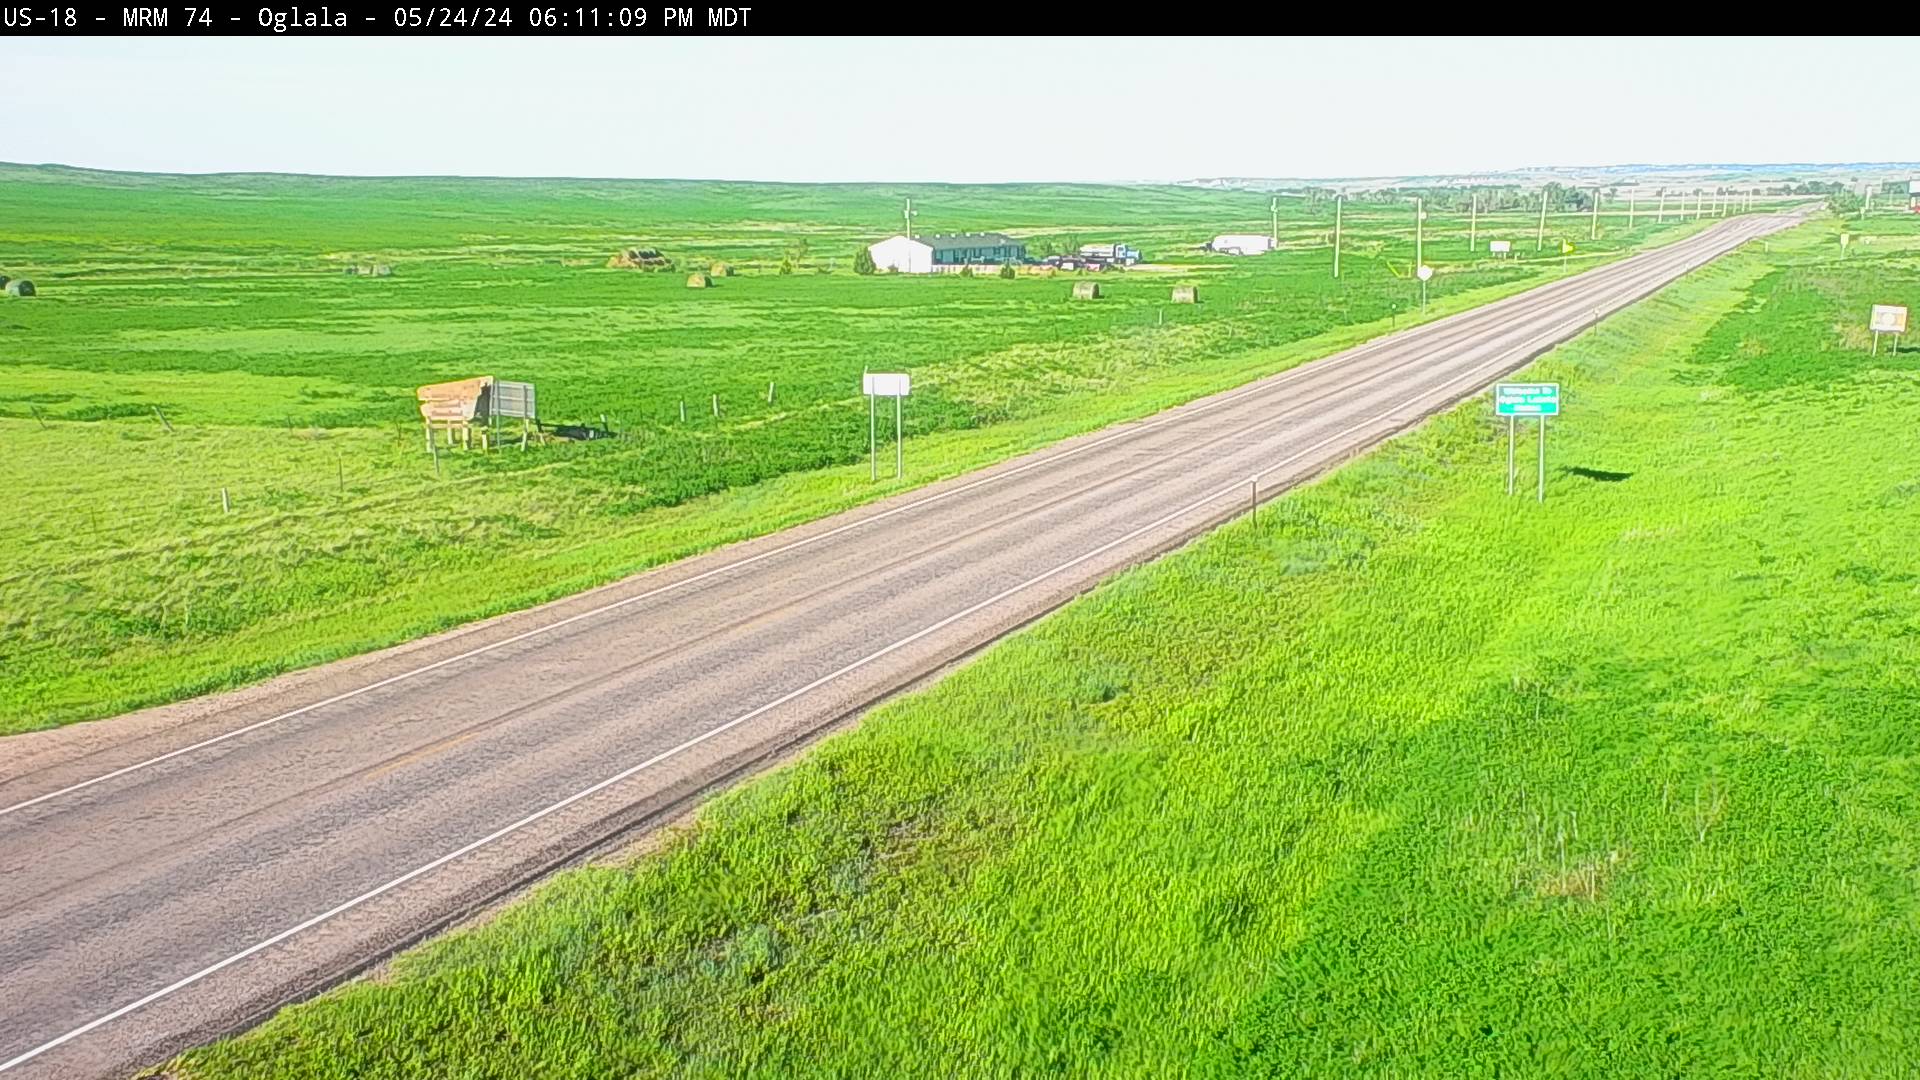 13 miles west of town US-18 @ MP 74 - East Traffic Camera